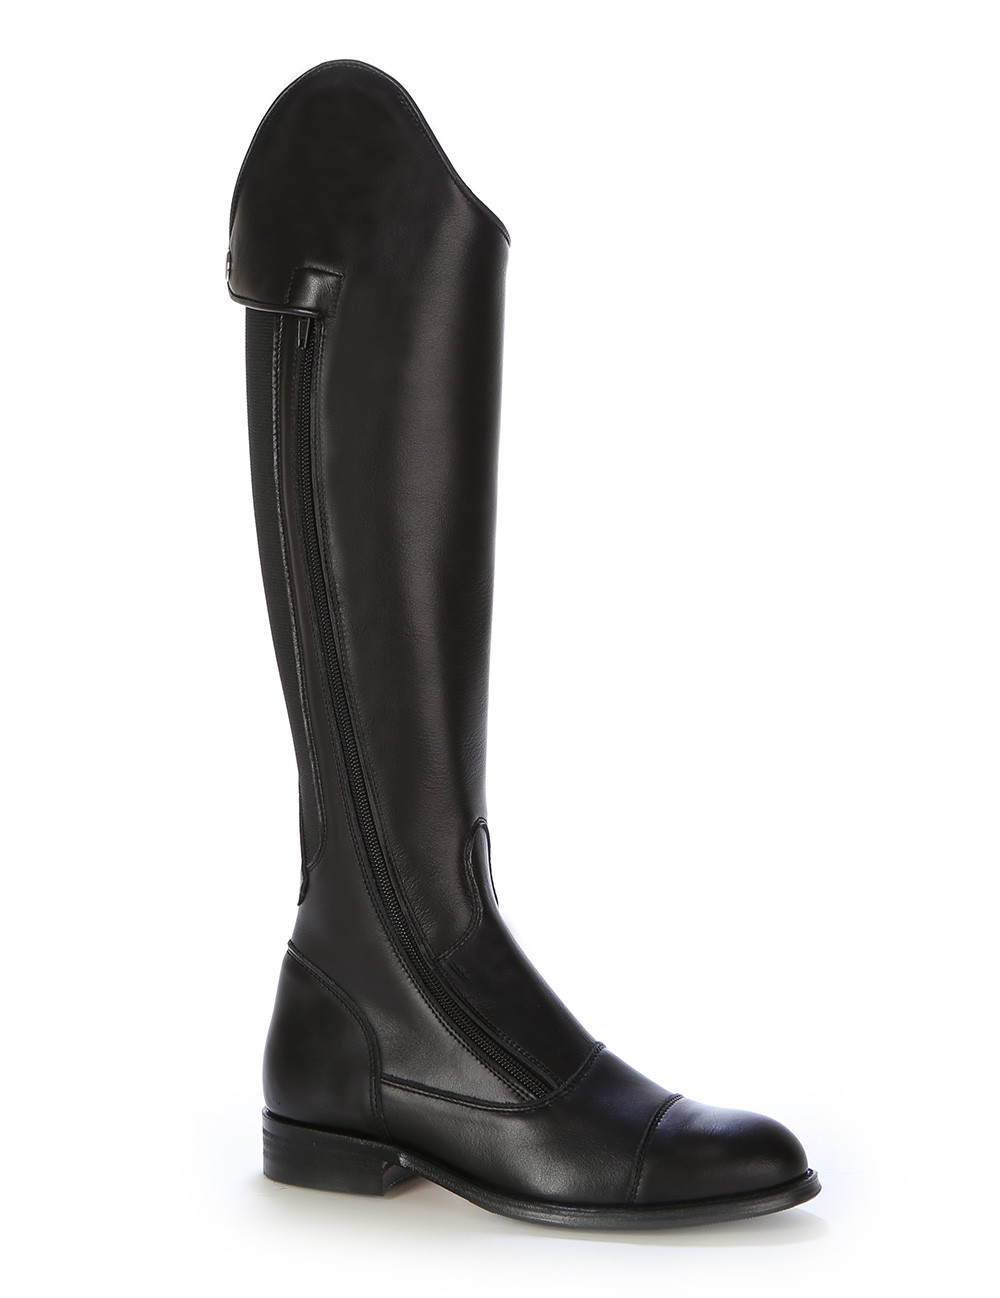 riding boots black leather